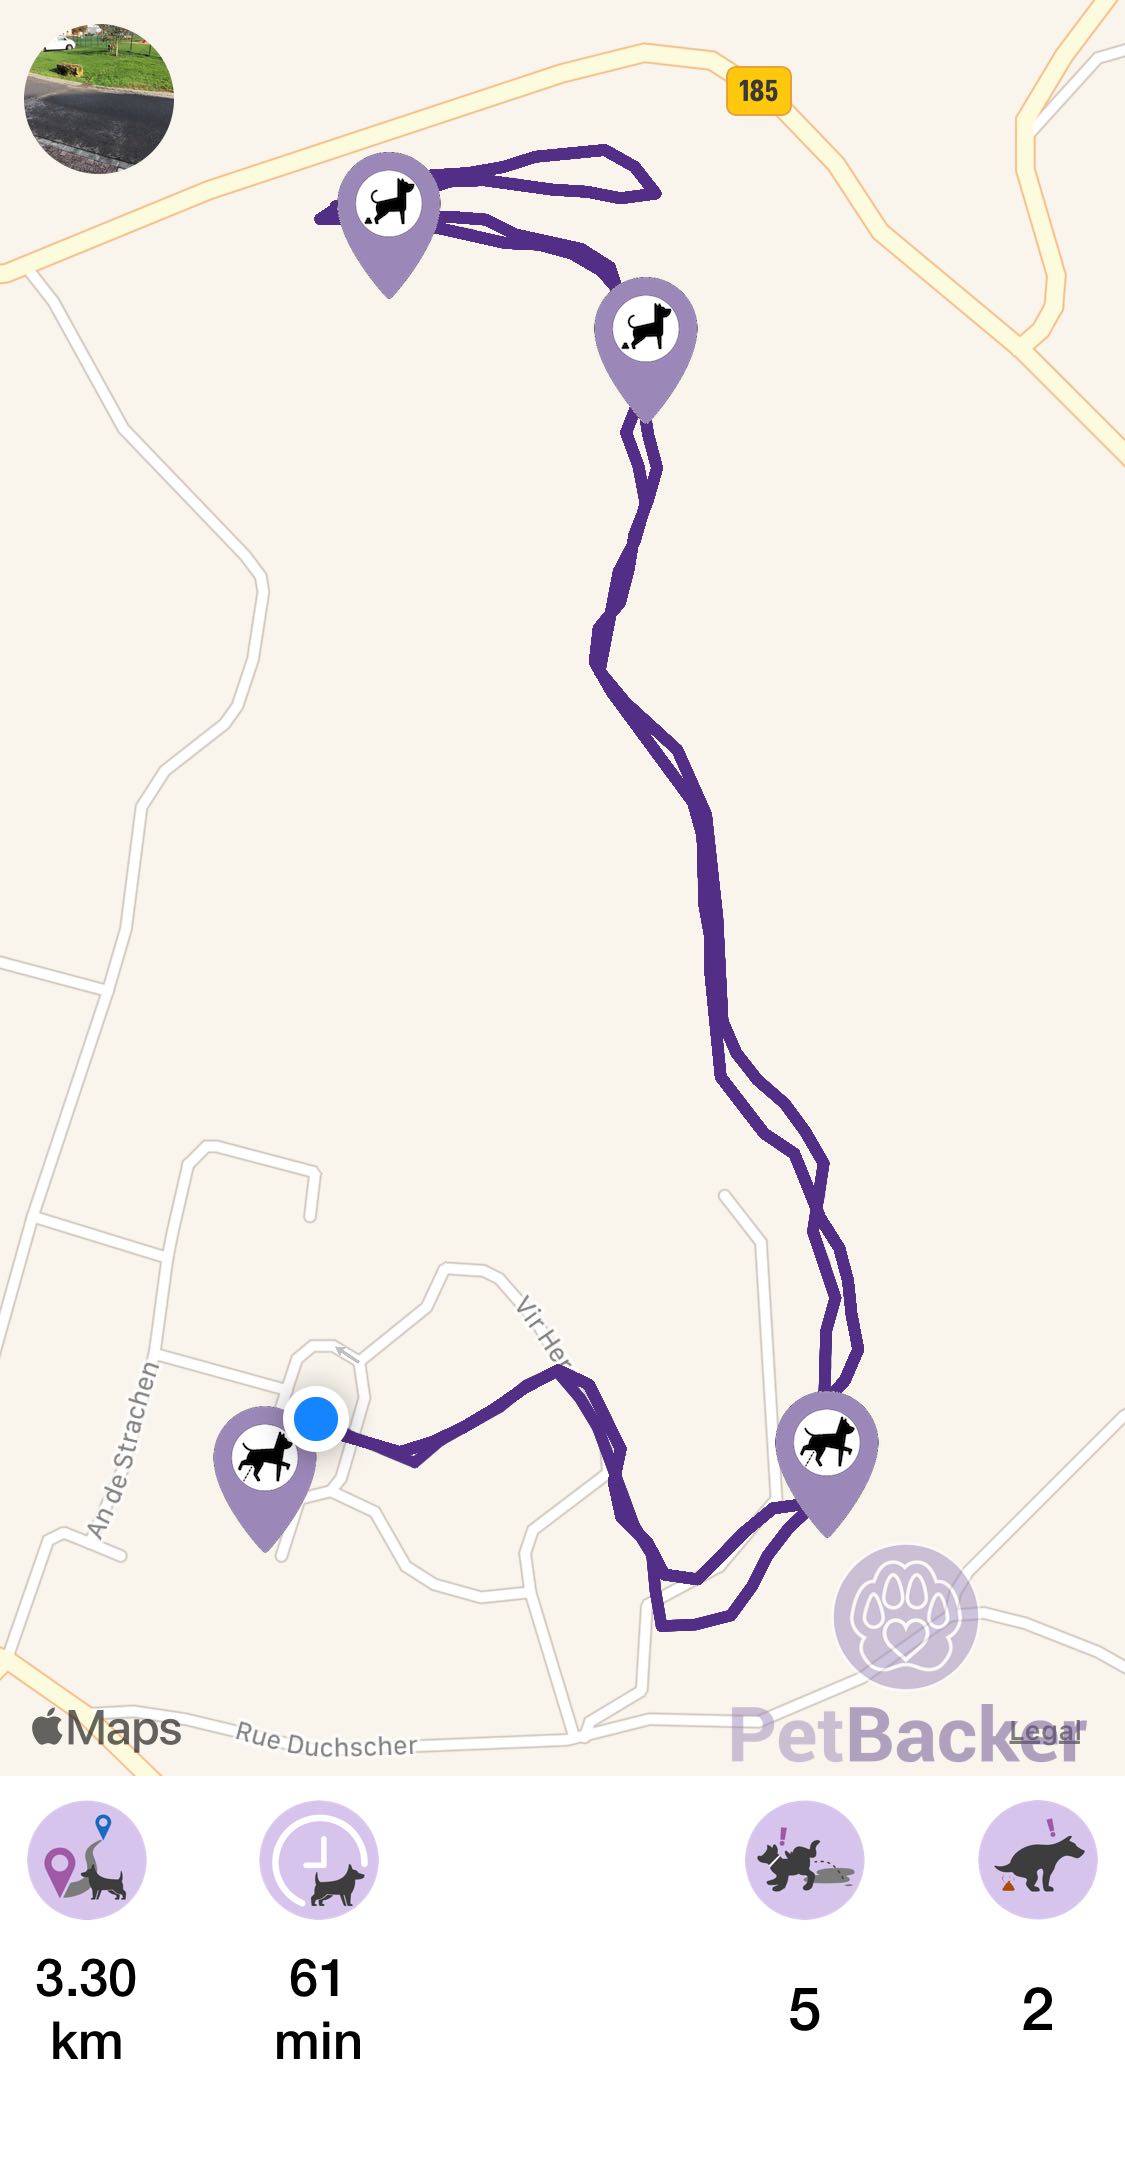 Just completed pet walking of 3.30 km